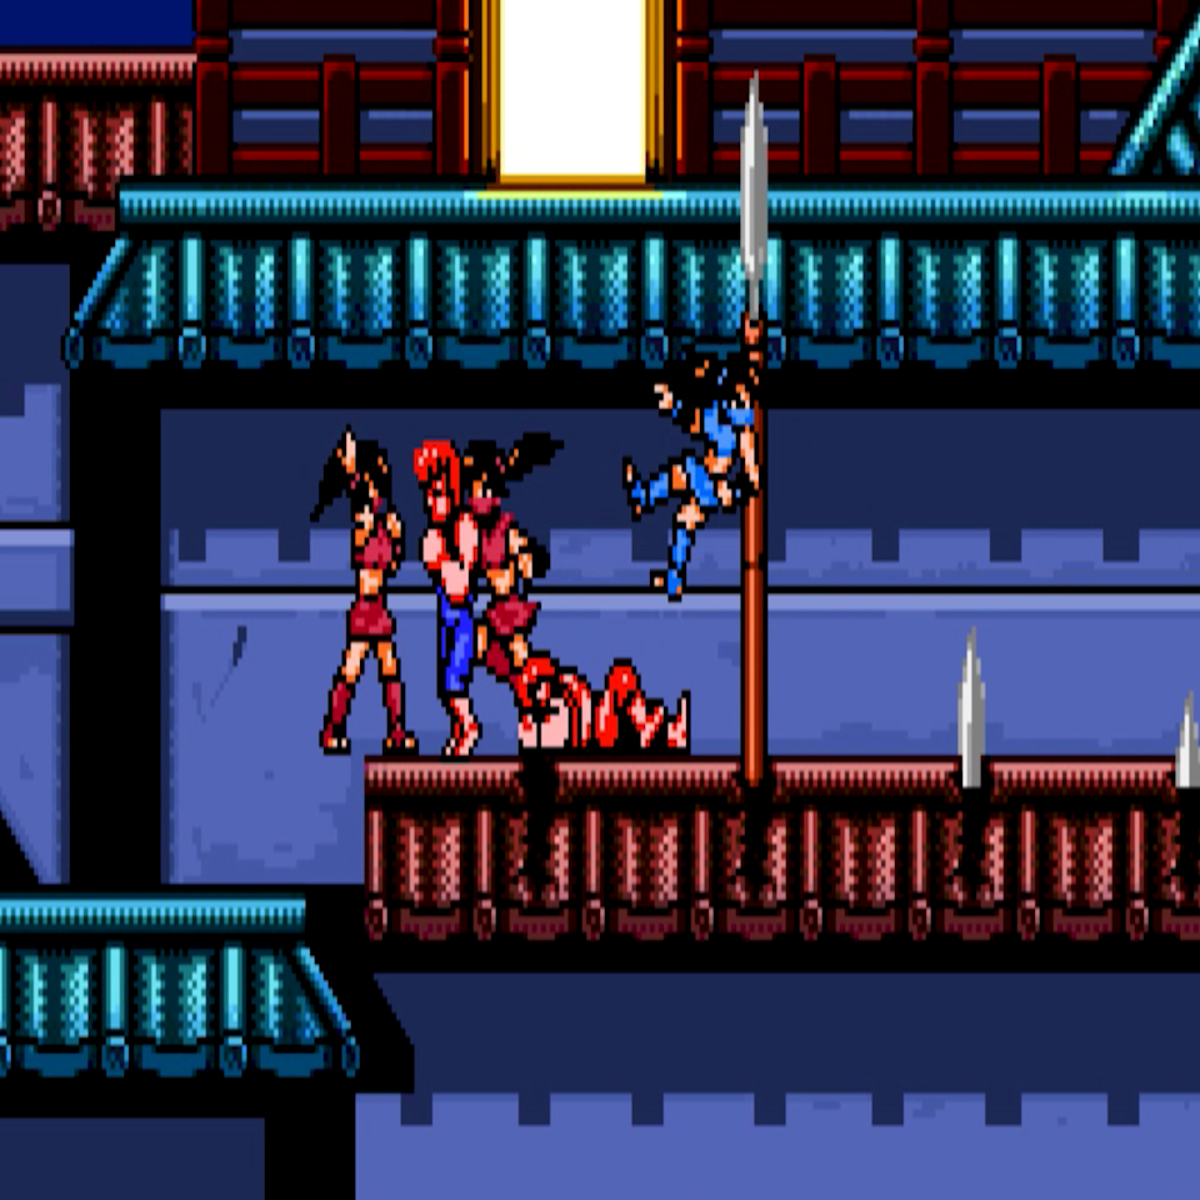 Review: Double Dragon IV (Sony PlayStation 4) – Digitally Downloaded